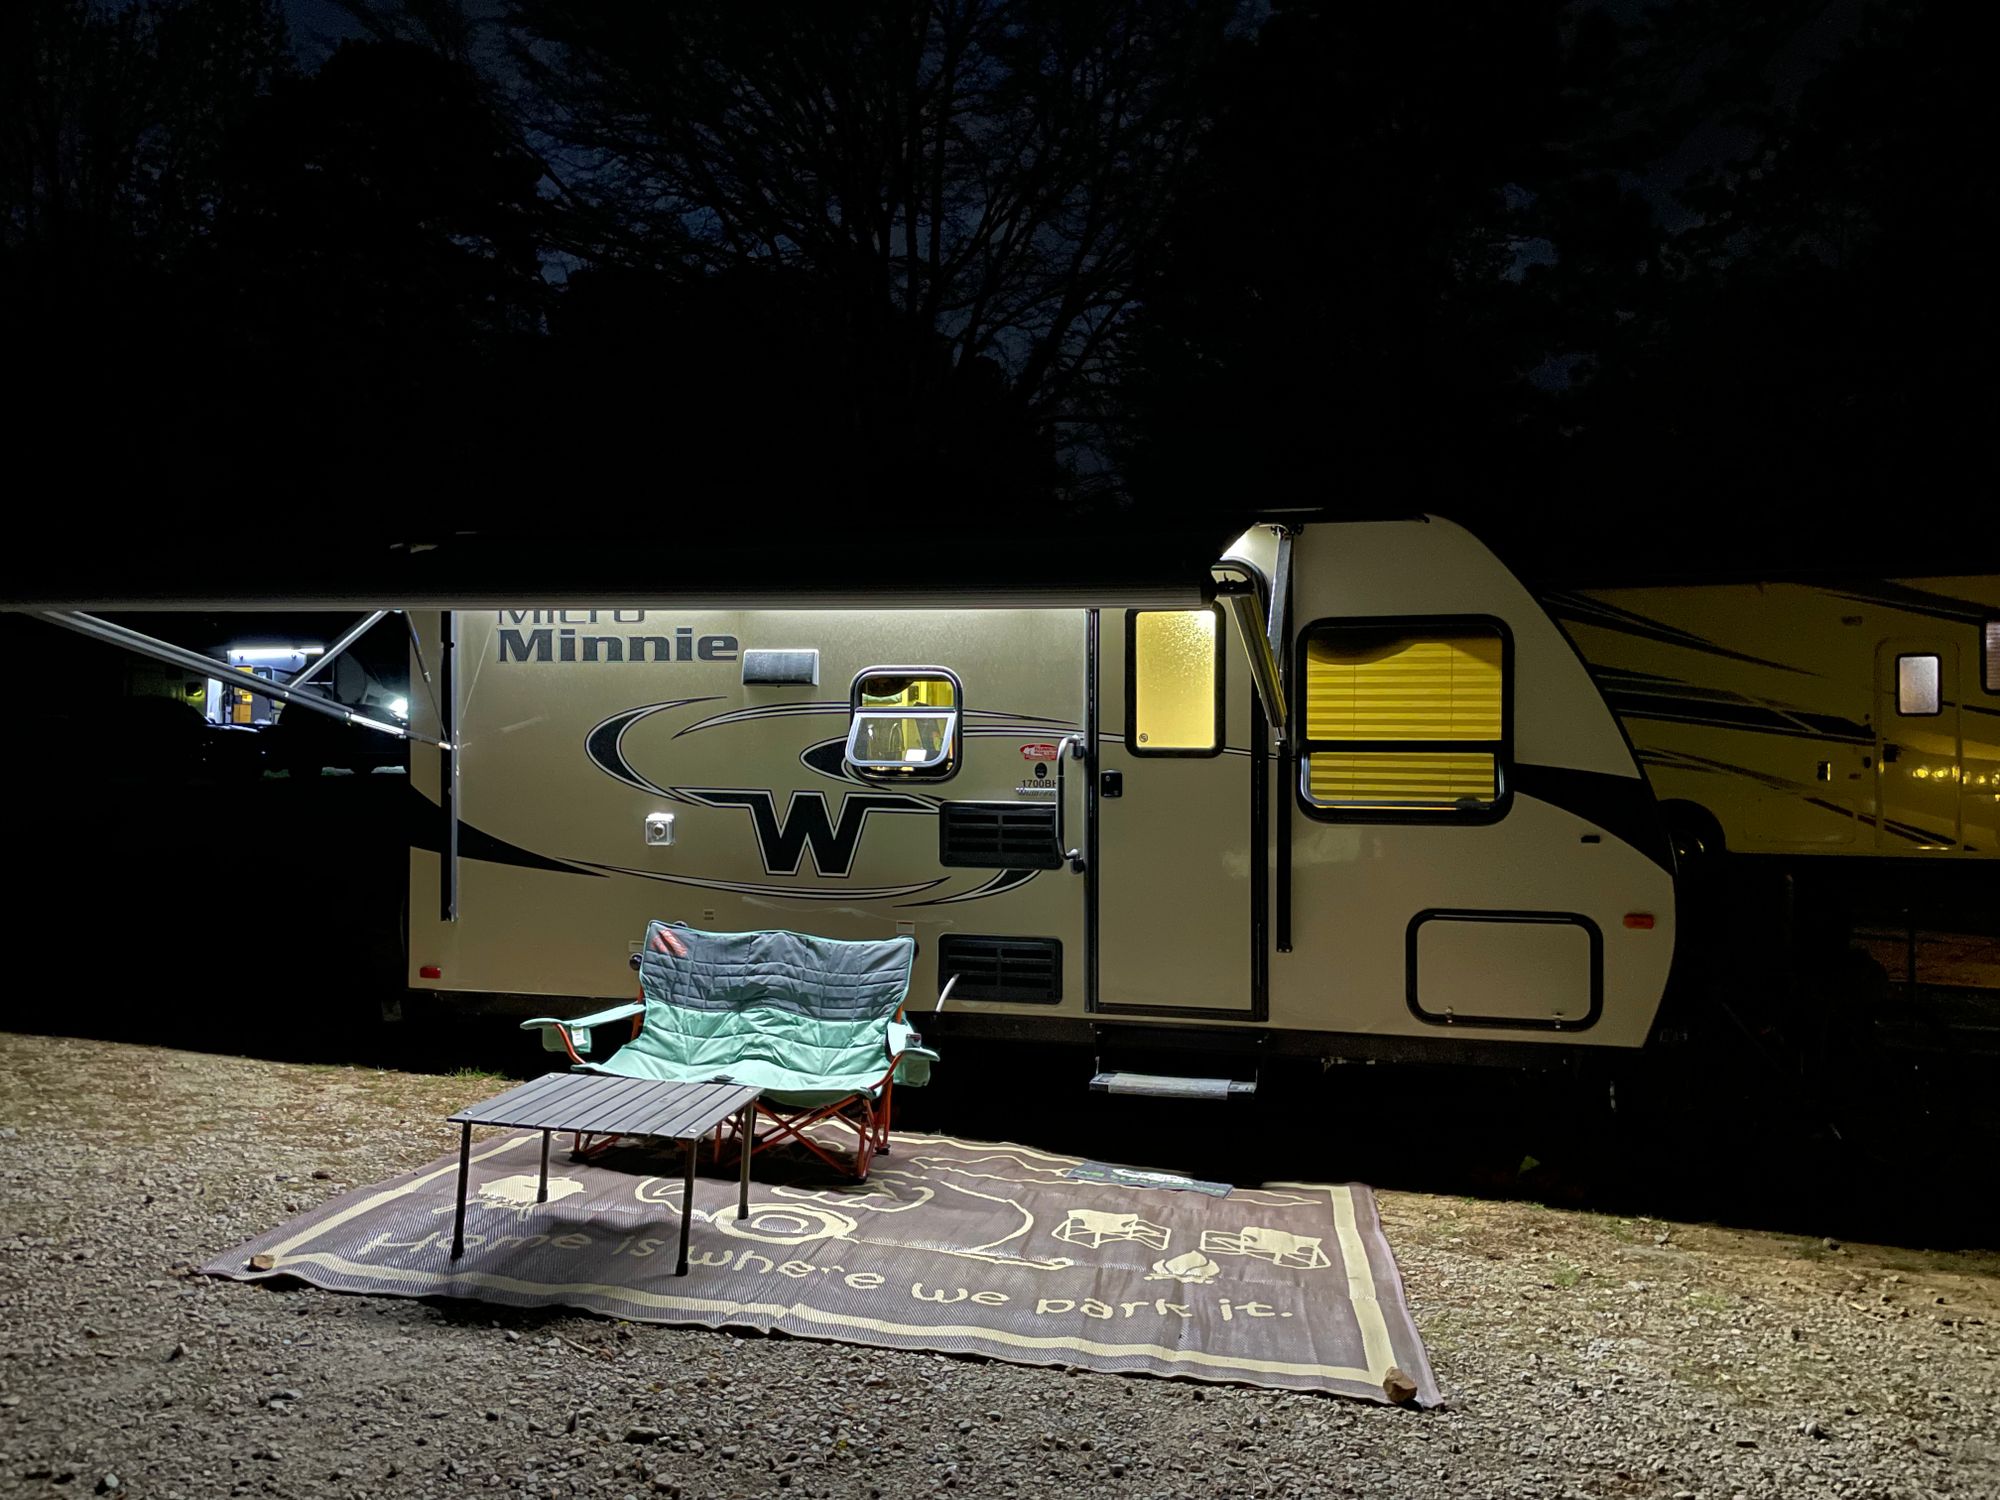 Travel trailer lit up at night. There's a rug outside with a loveseat camp chair and a small table.